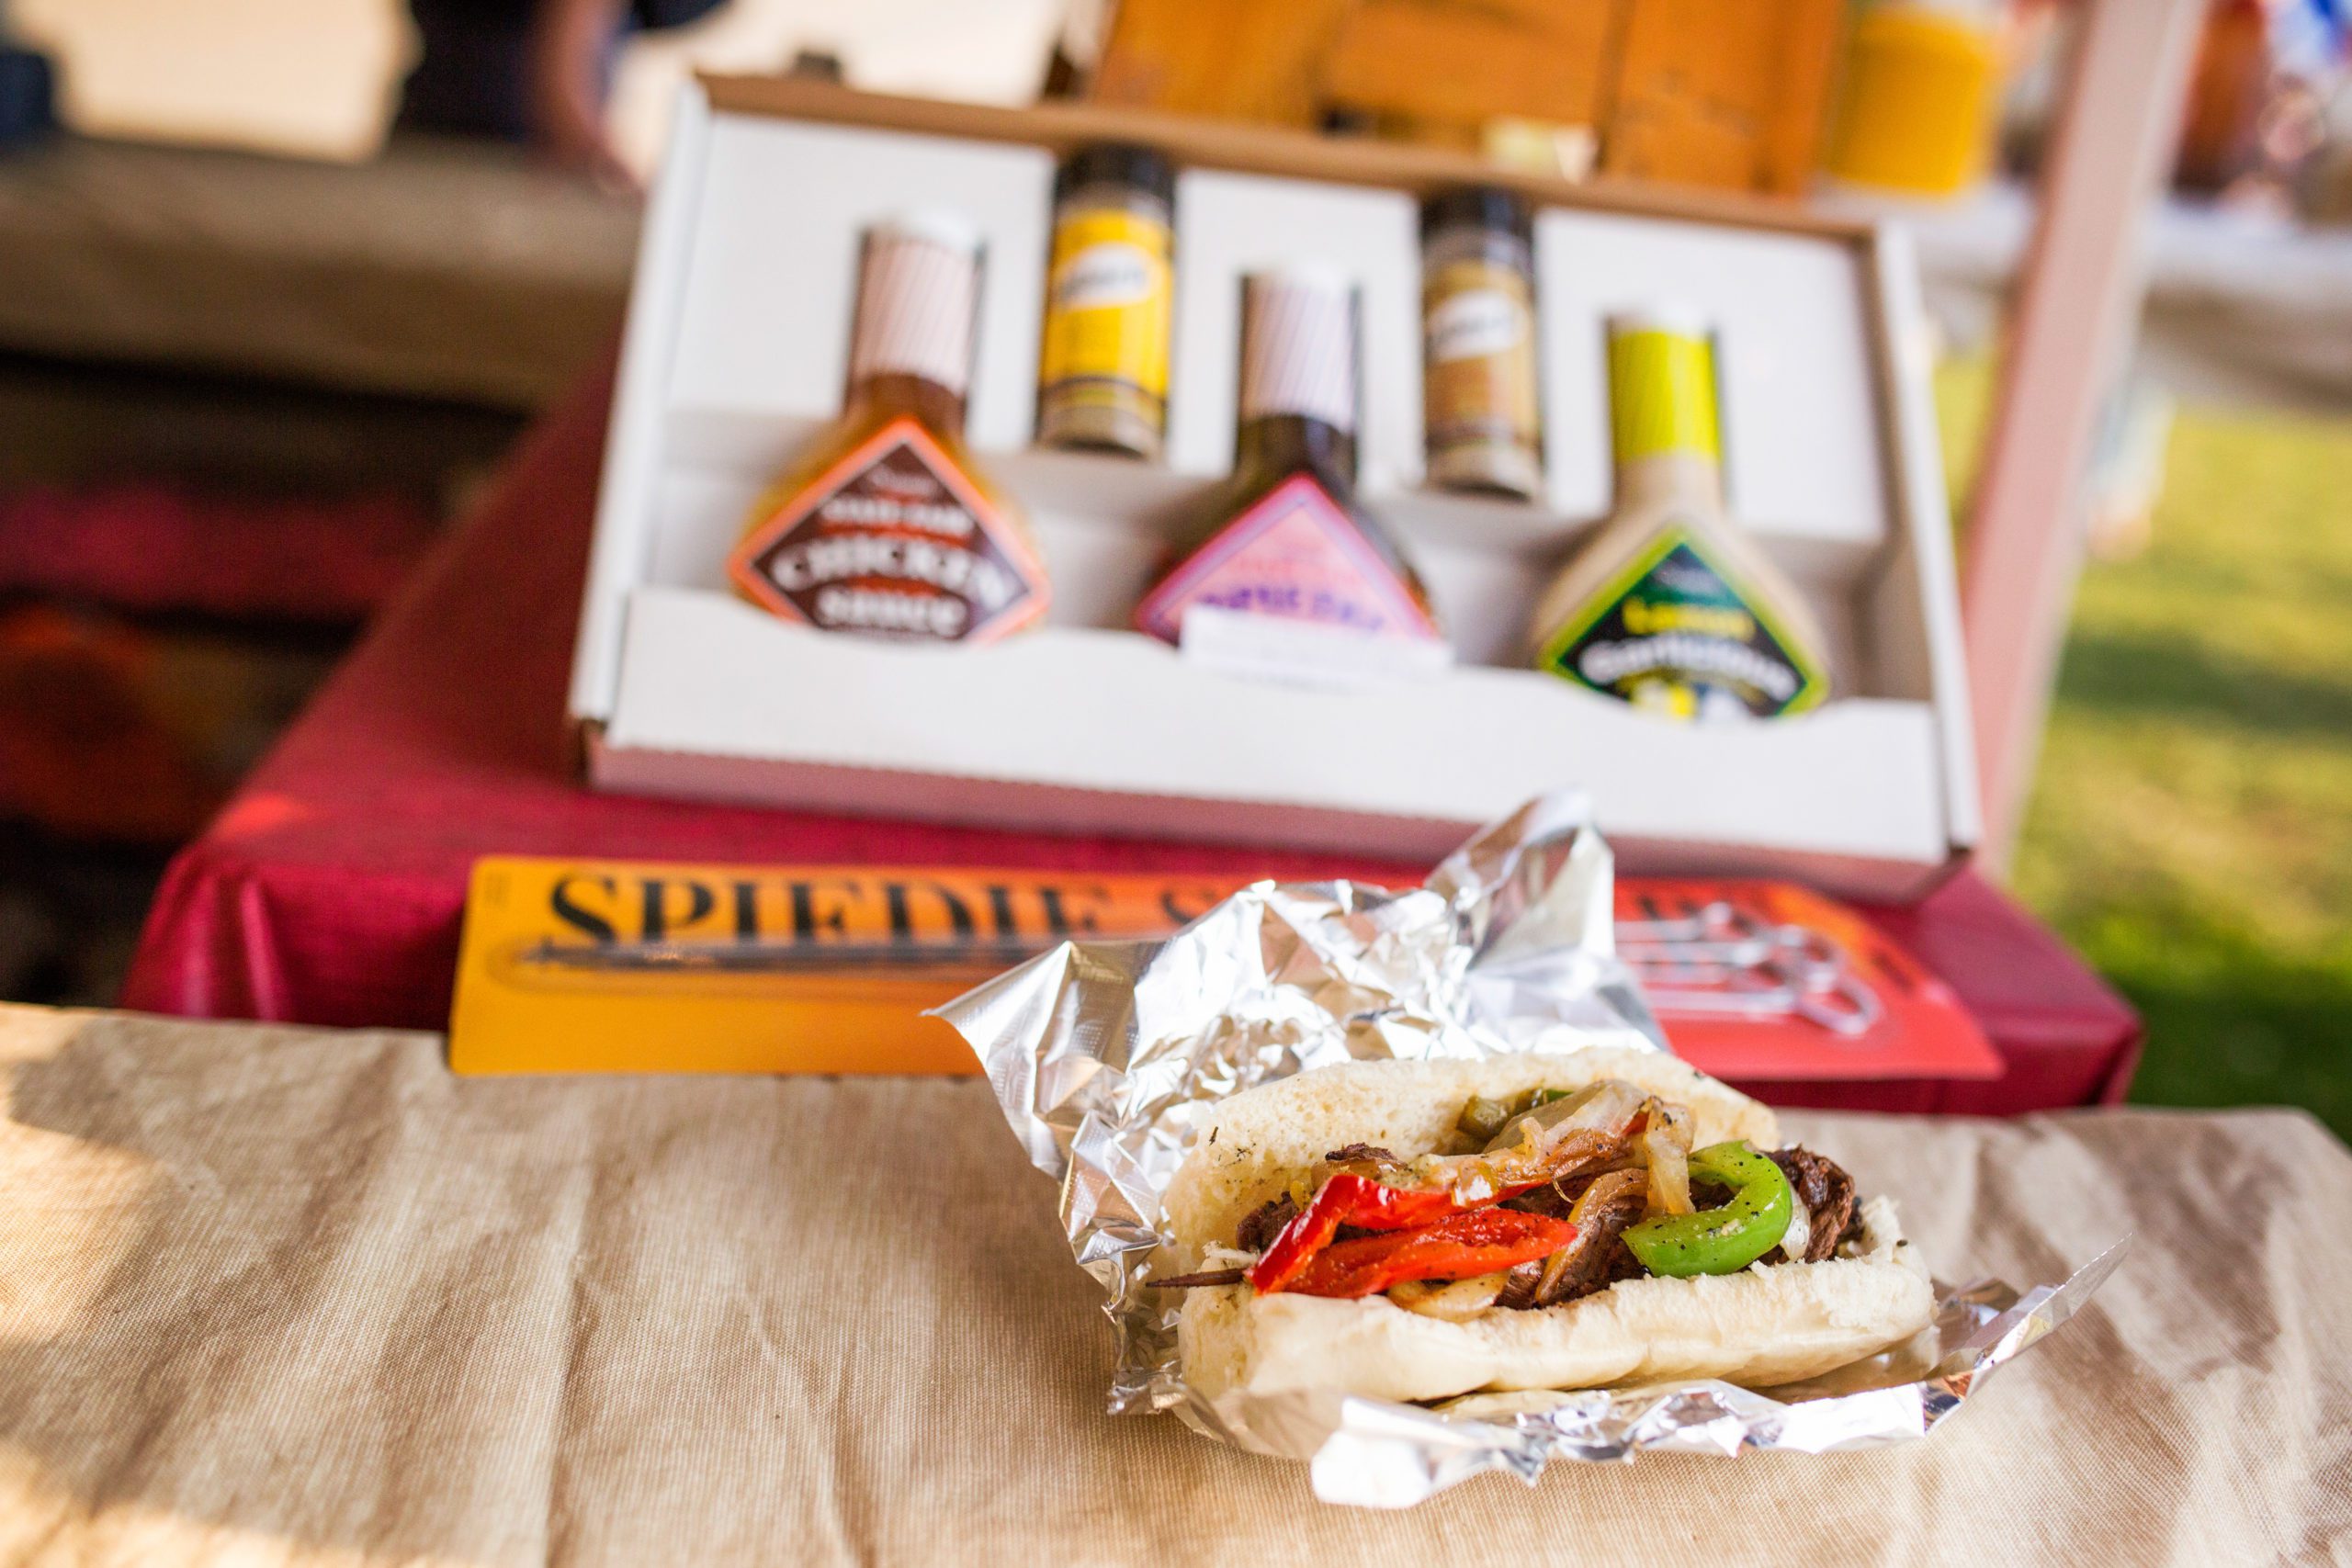 spiedie sauces and spice kit available for purchase